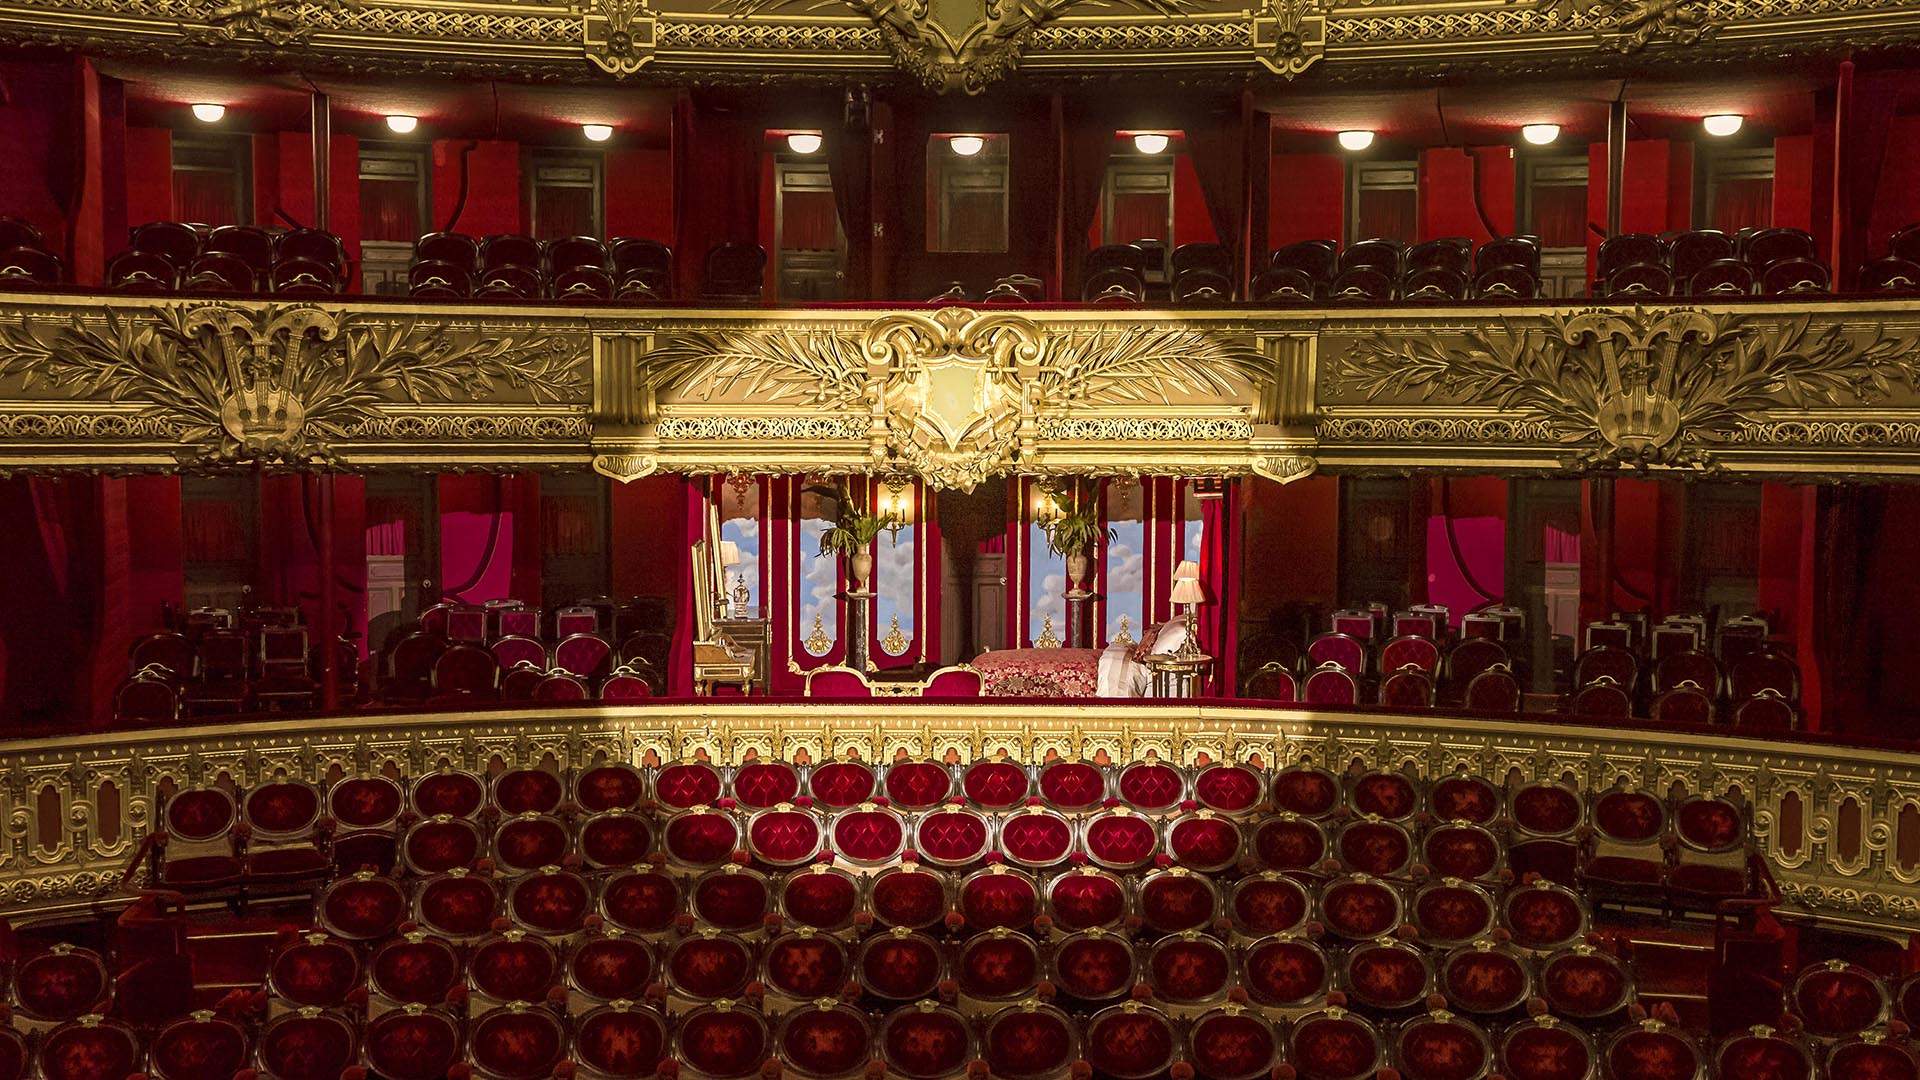 The Paris Theatre That Inspired 'The Phantom of the Opera' Is Hosting Its First-Ever Overnight Stay